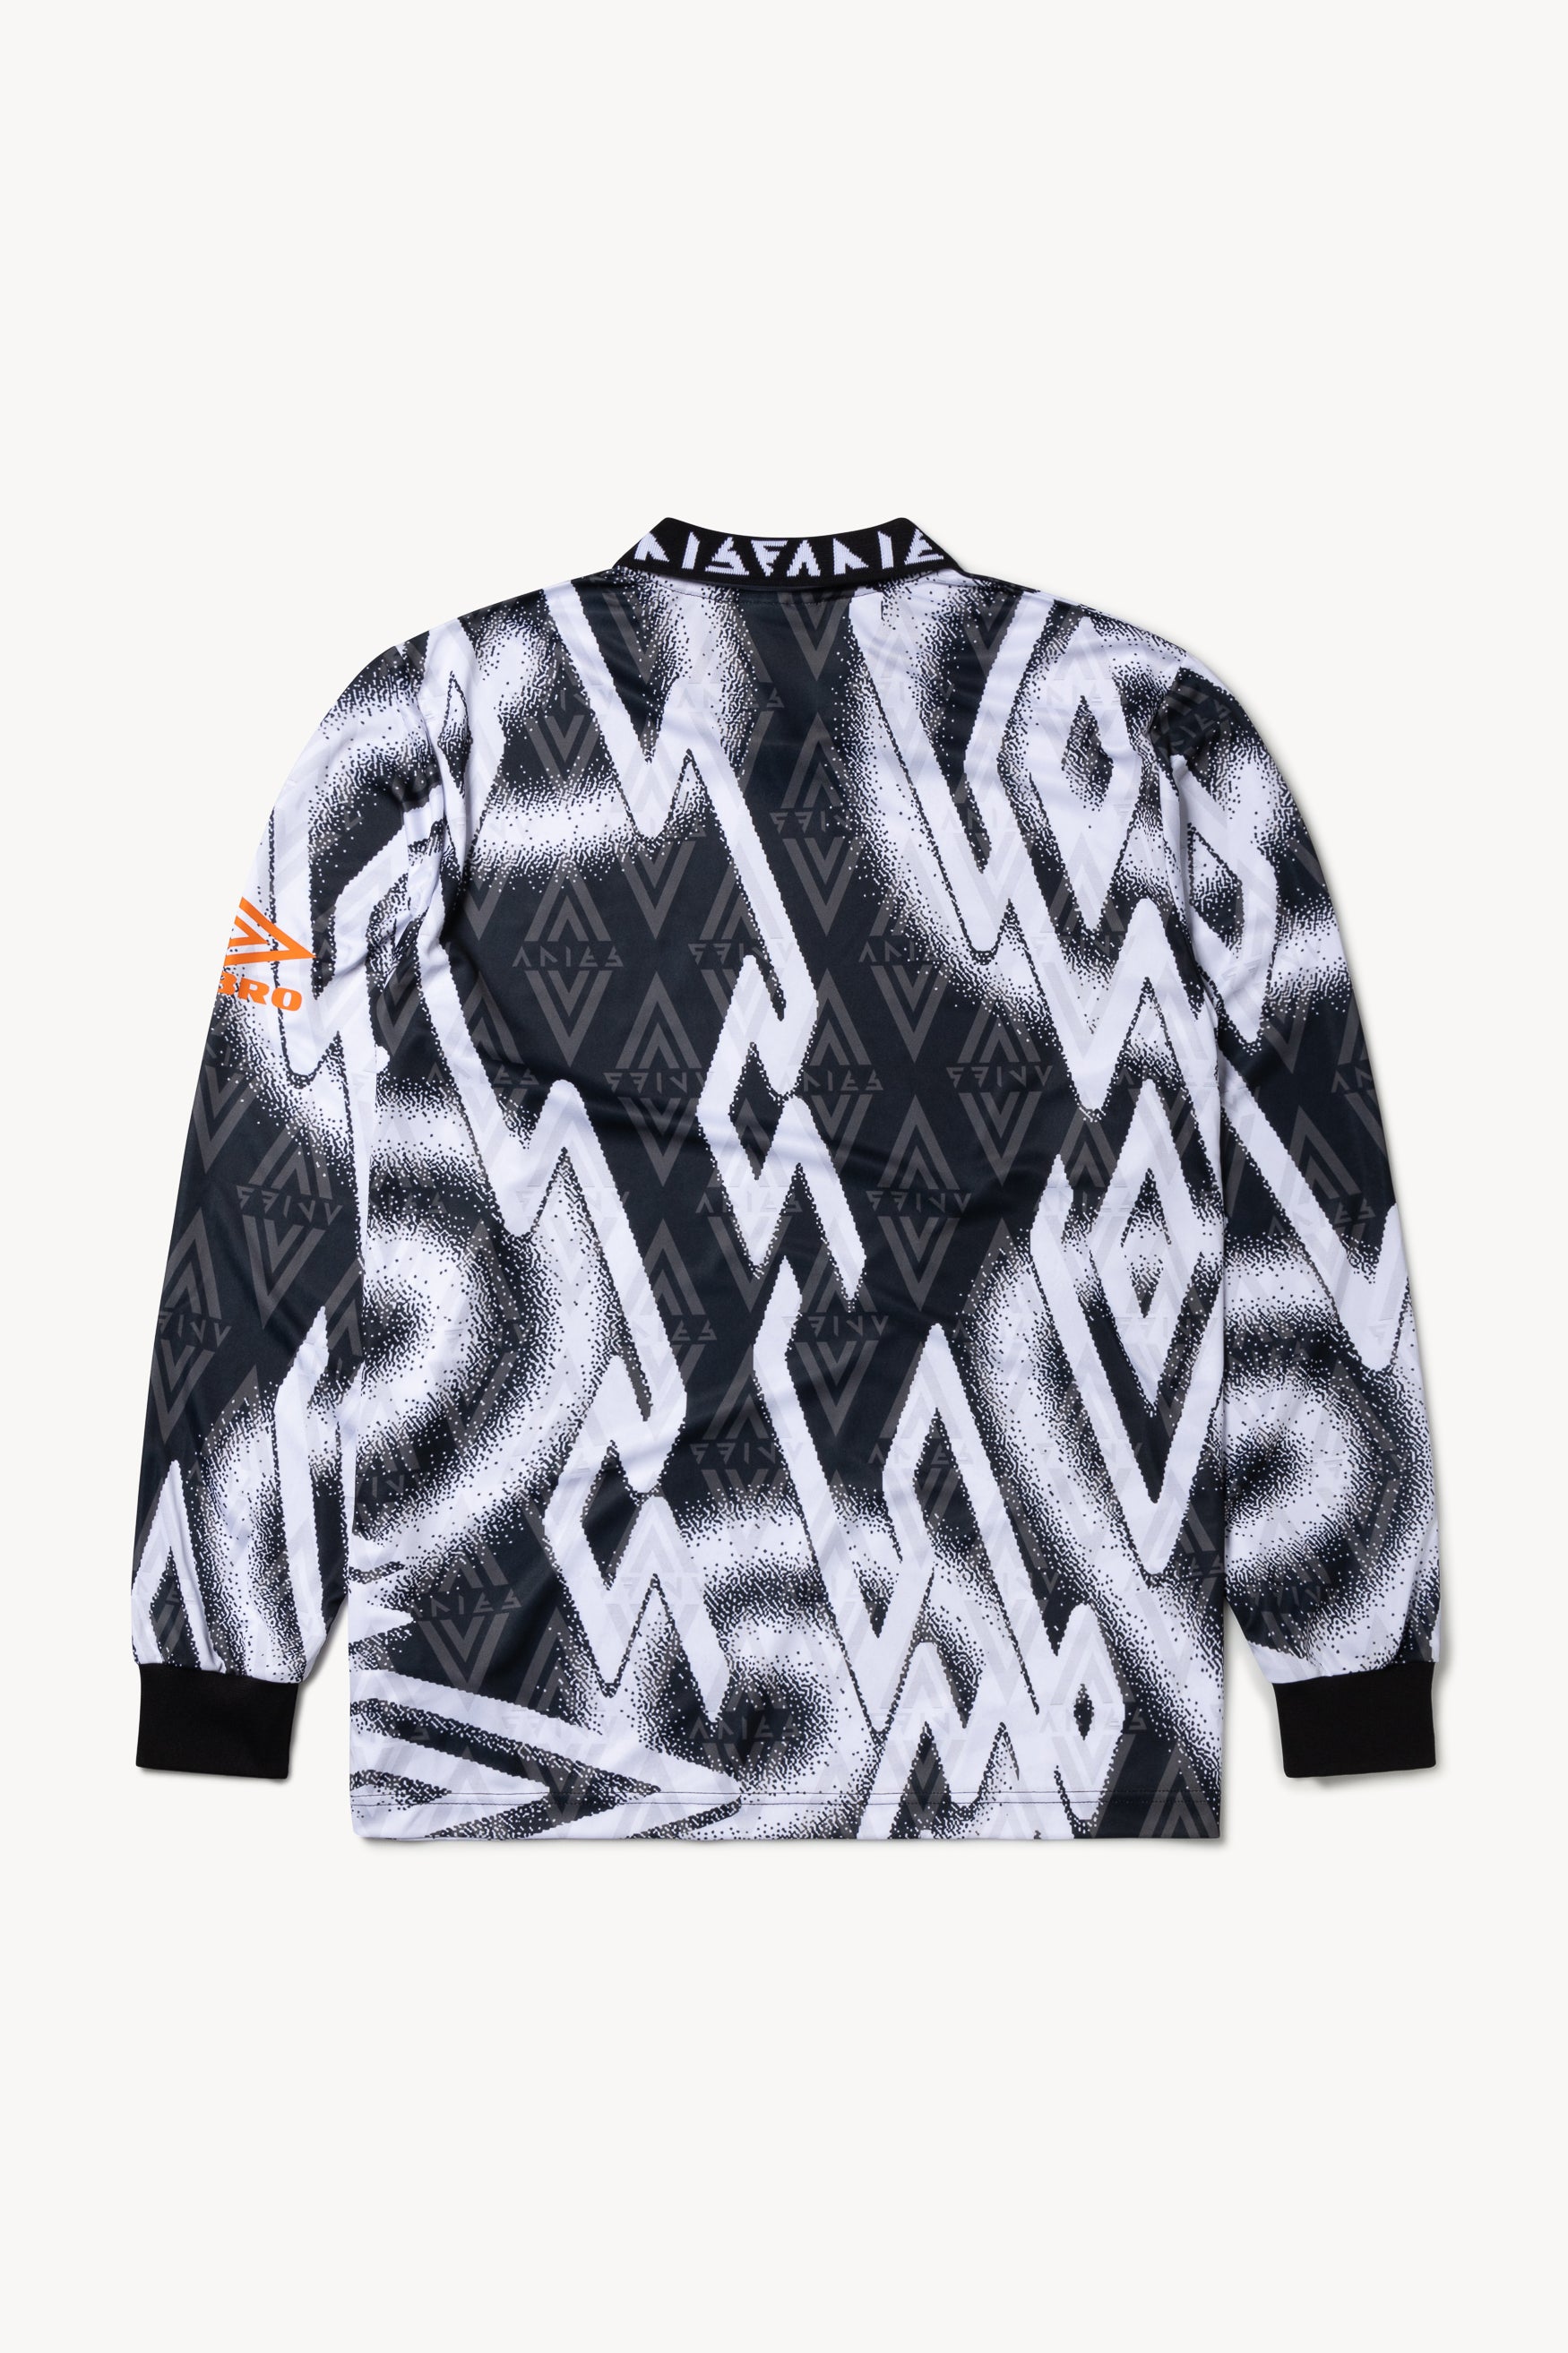 Load image into Gallery viewer, Aries x Umbro Football Jersey